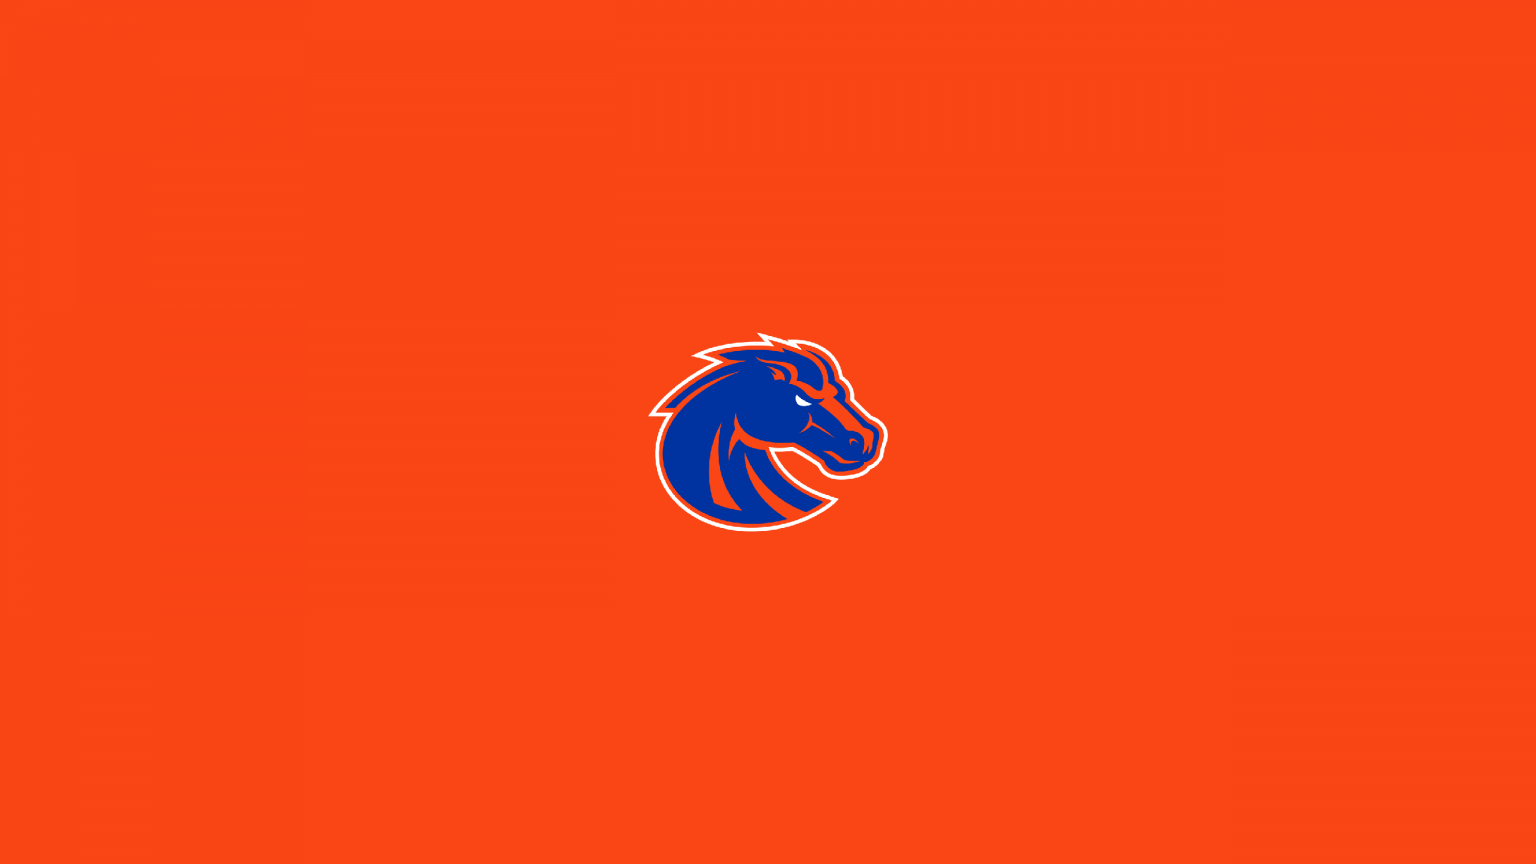 Boise State Broncos - NCAAF - Square Bettor